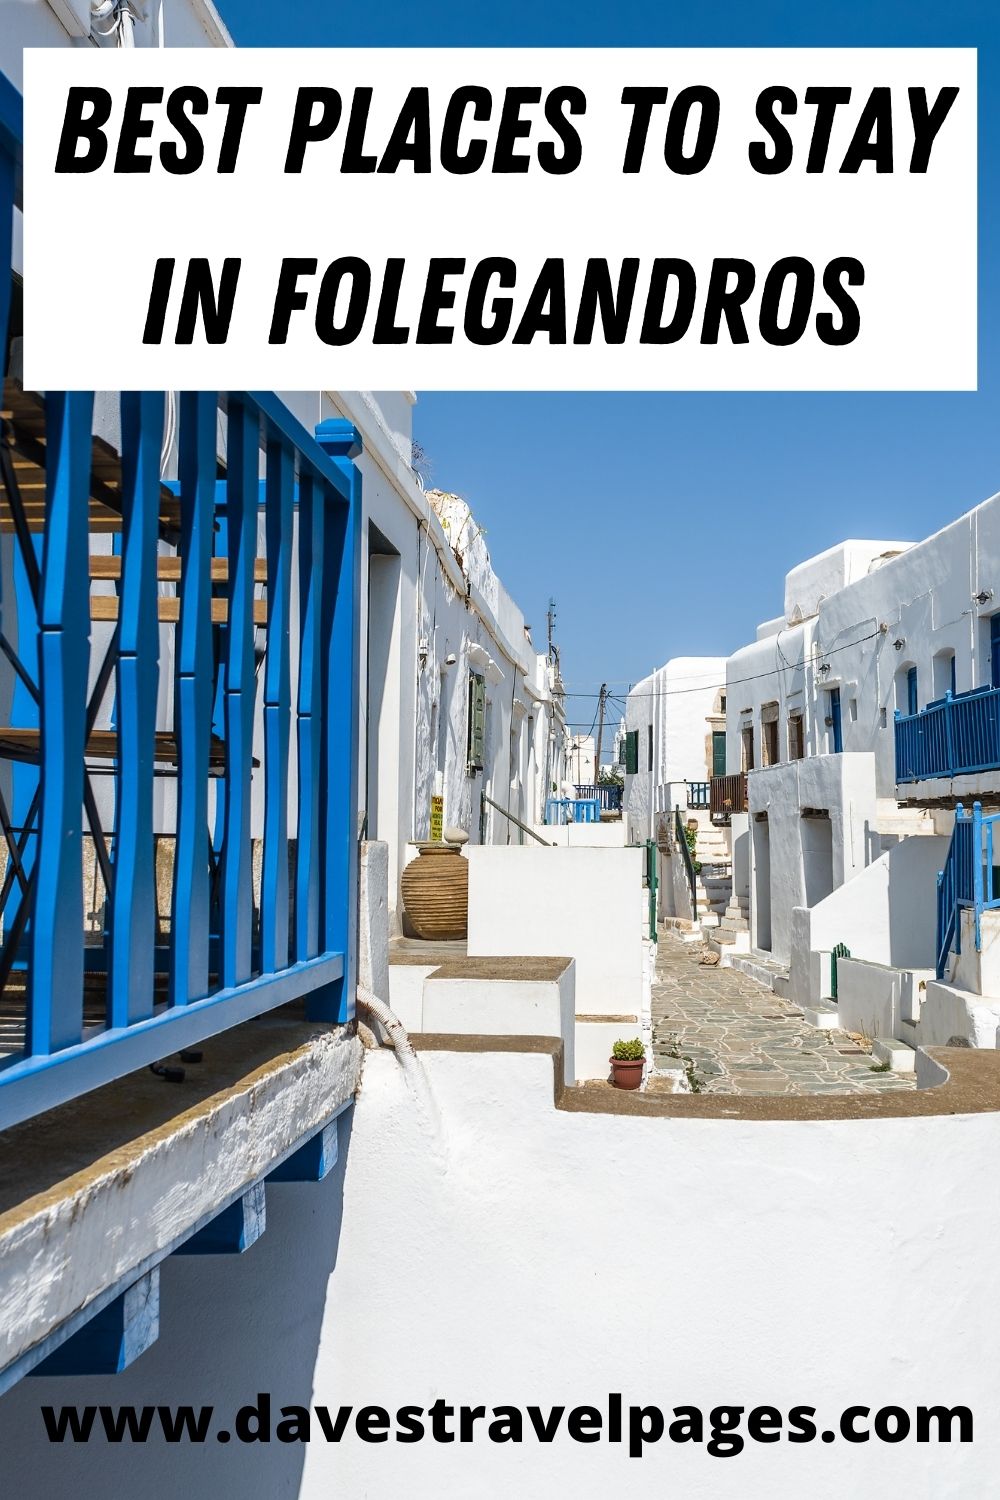 Best places to stay in Folegandros island Greece